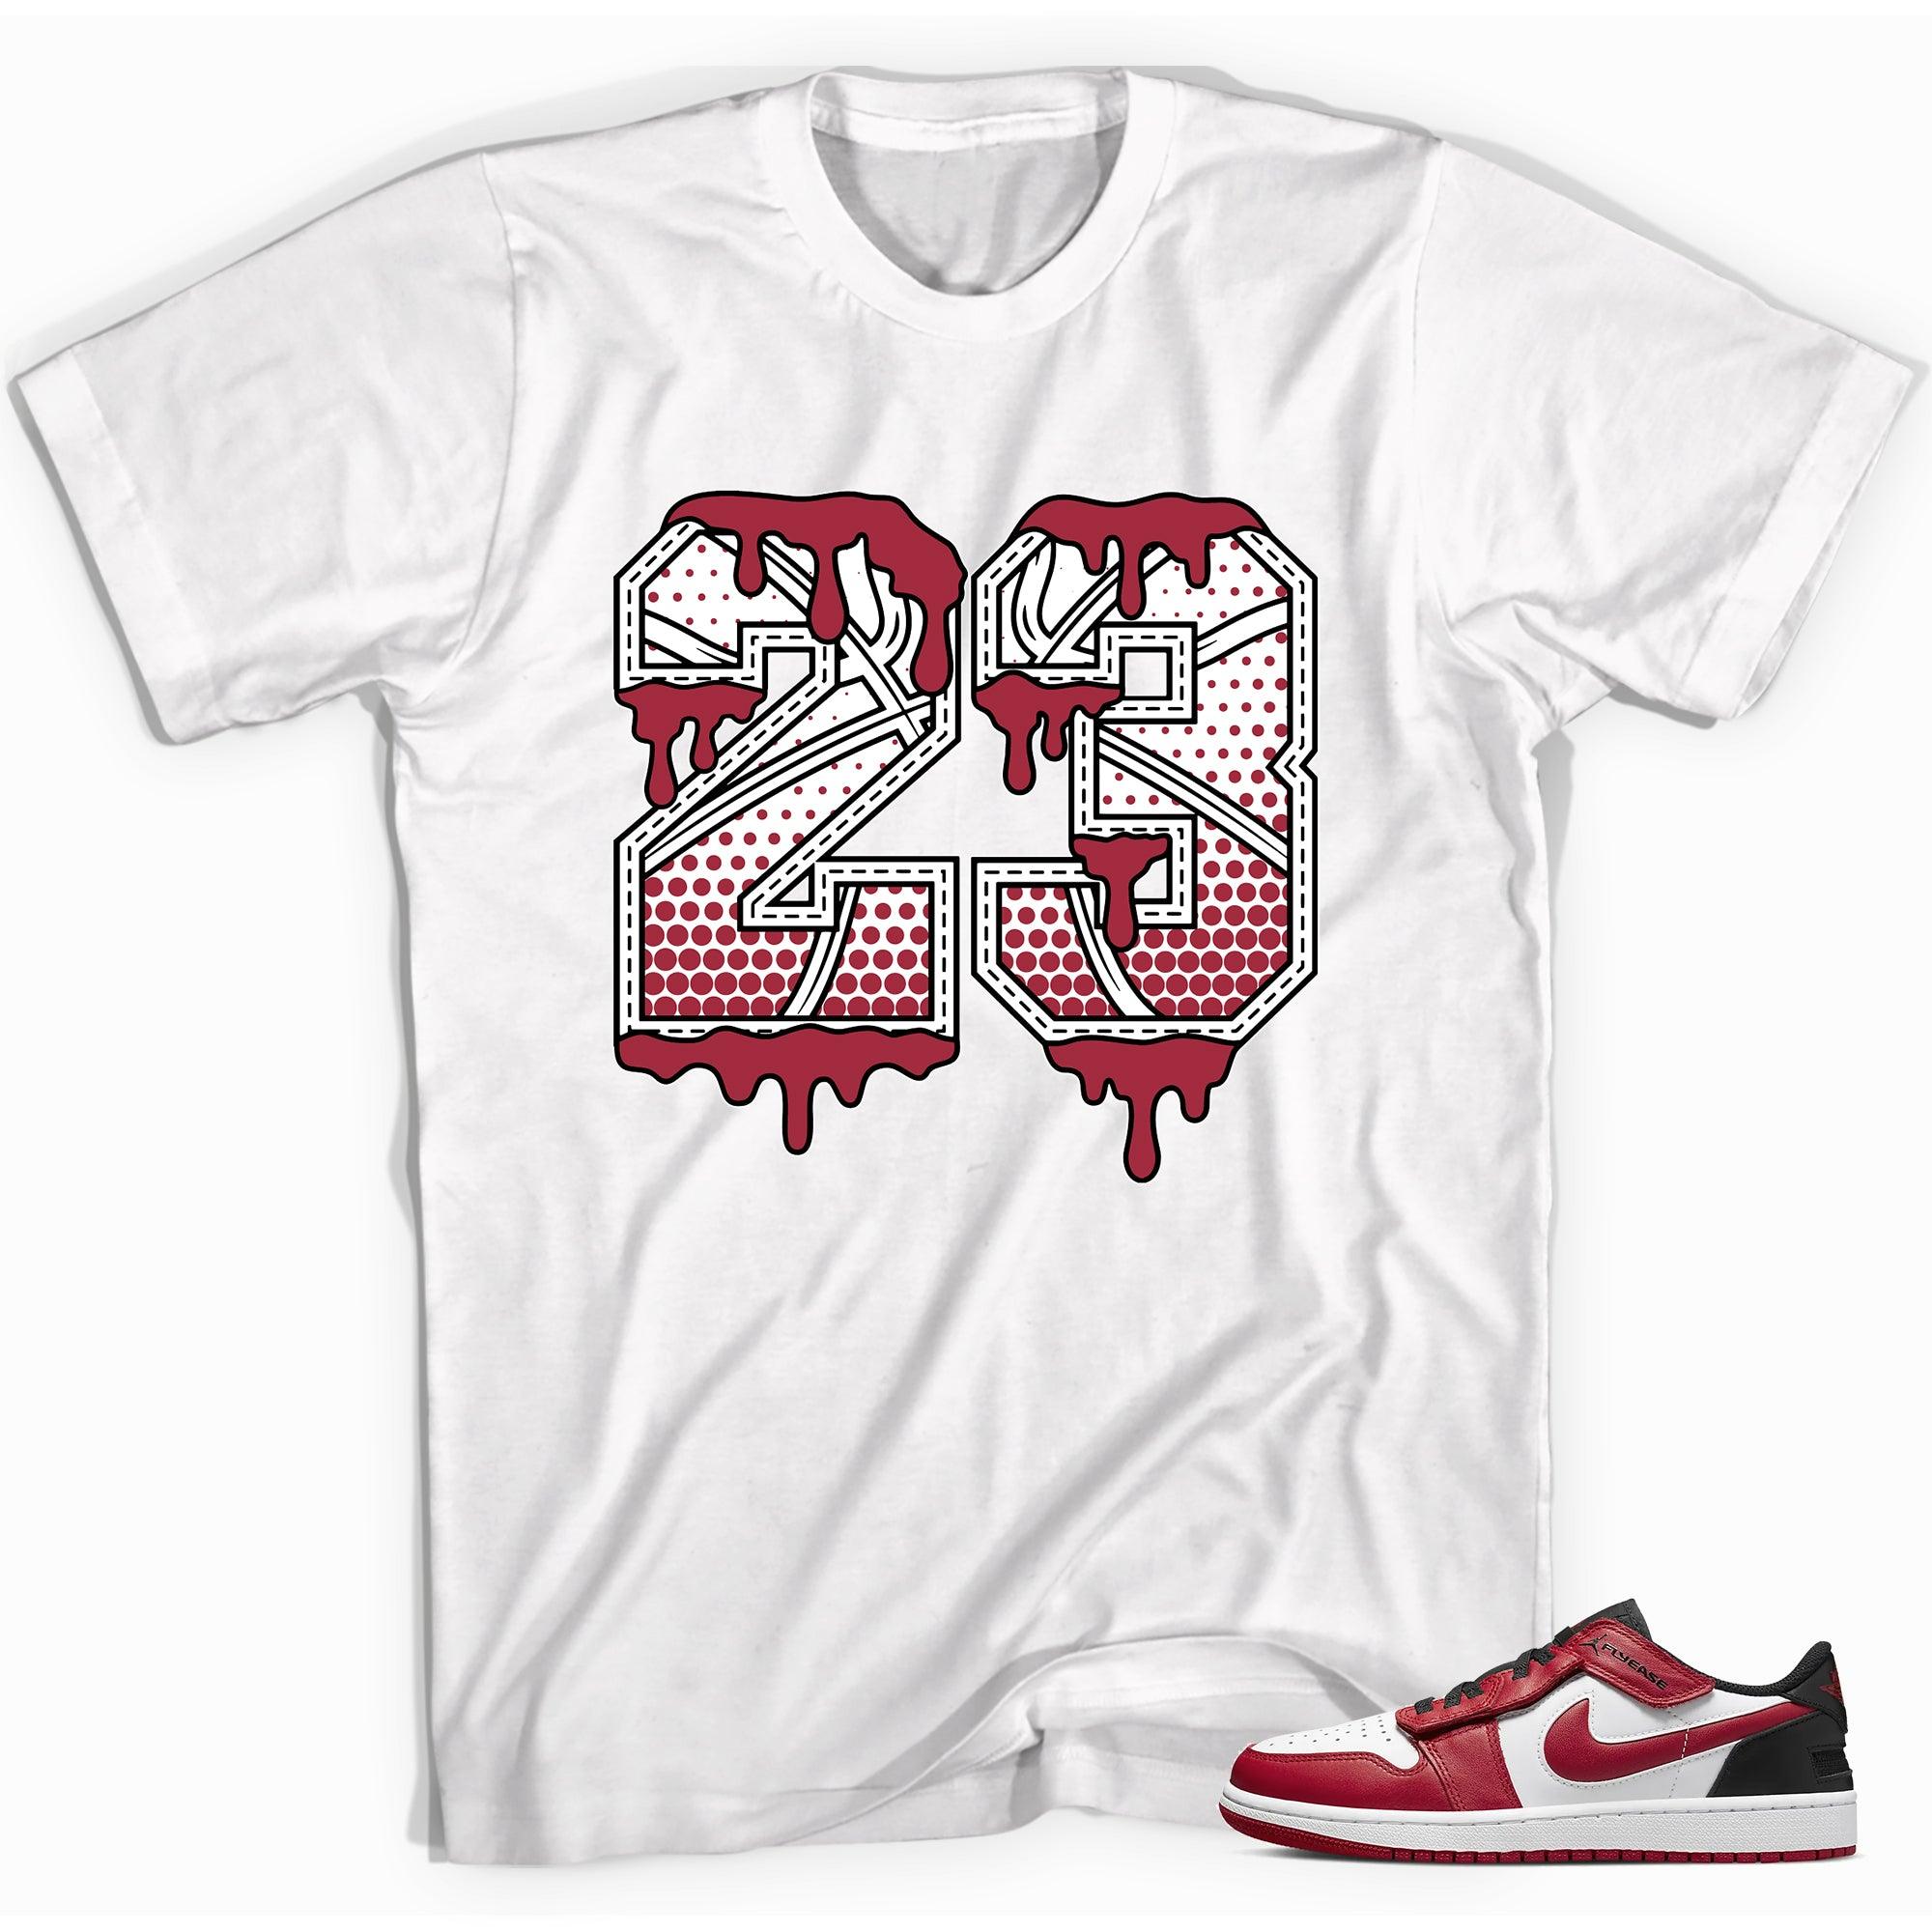 Number 23 Ball Shirt AJ 1 Low FlyEase photo